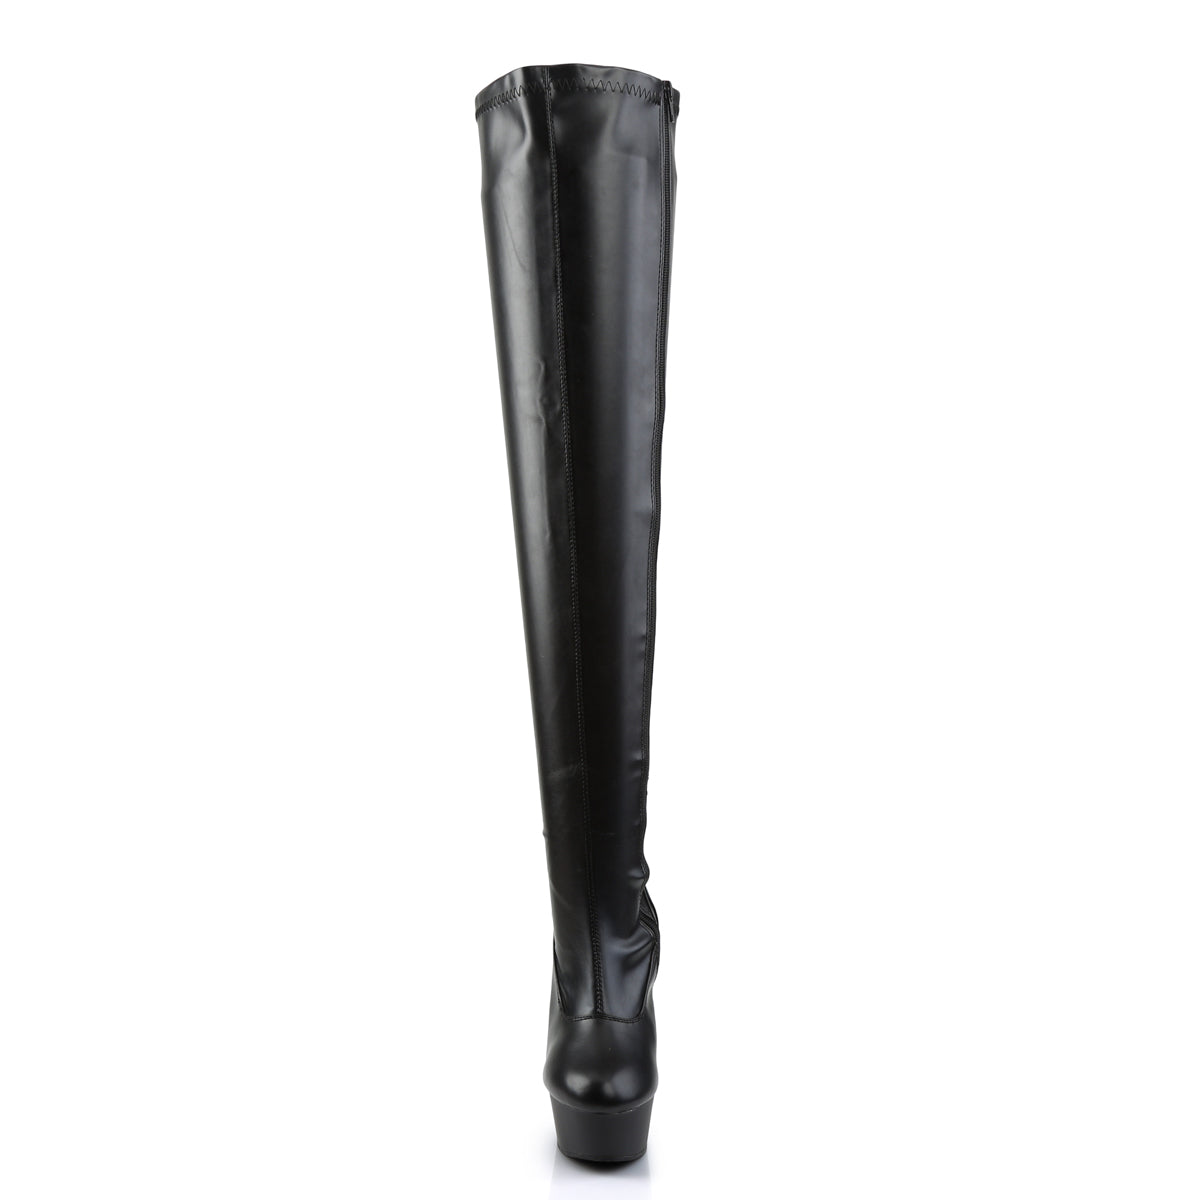 DELIGHT-3000 Black Thigh High Boots